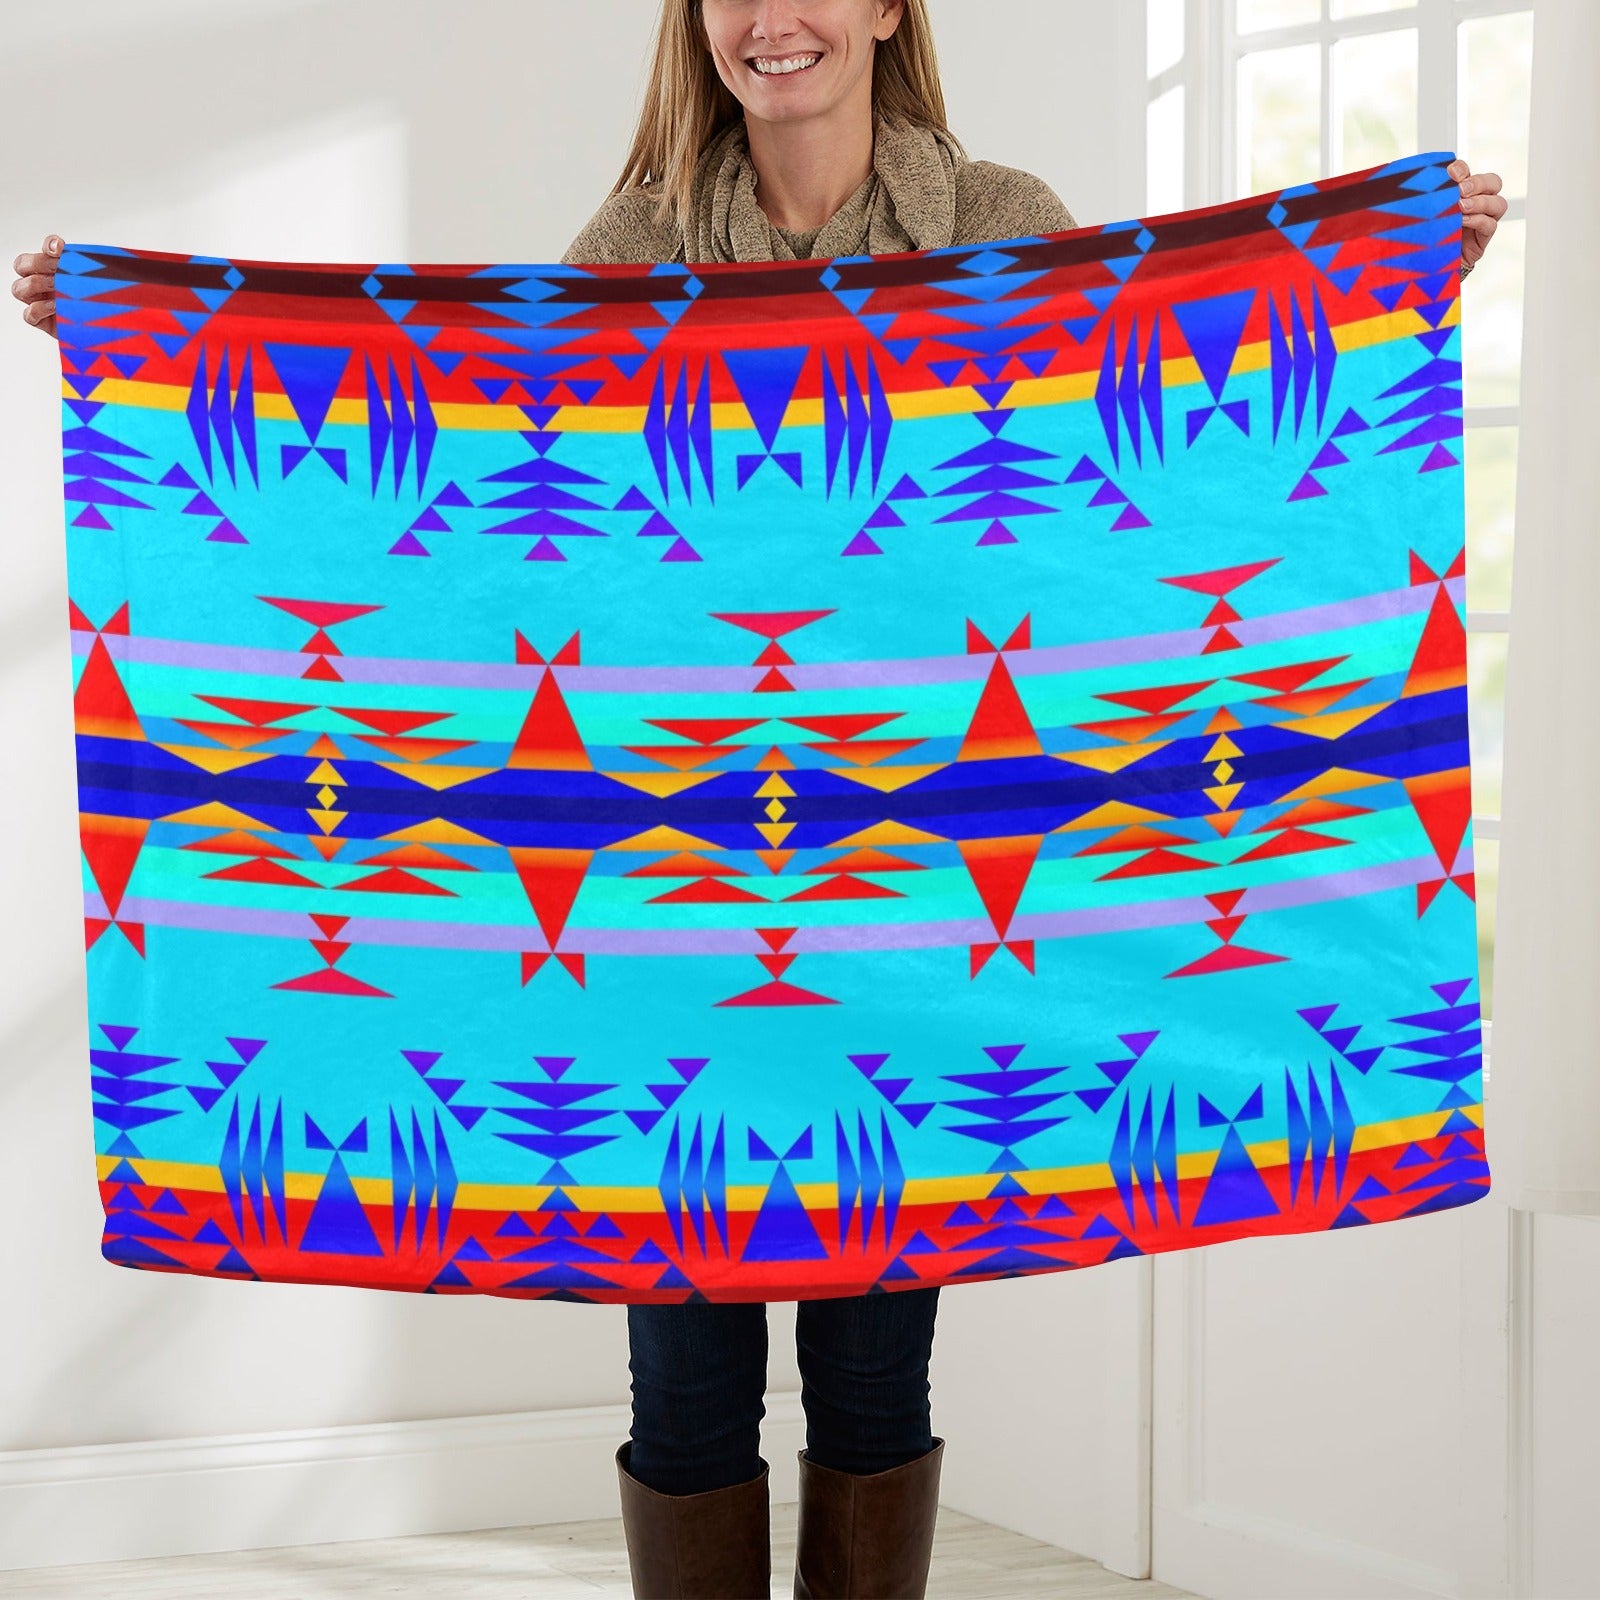 Between the Mountains Blue Baby Blanket 40"x50" Baby Blanket 40"x50" e-joyer 